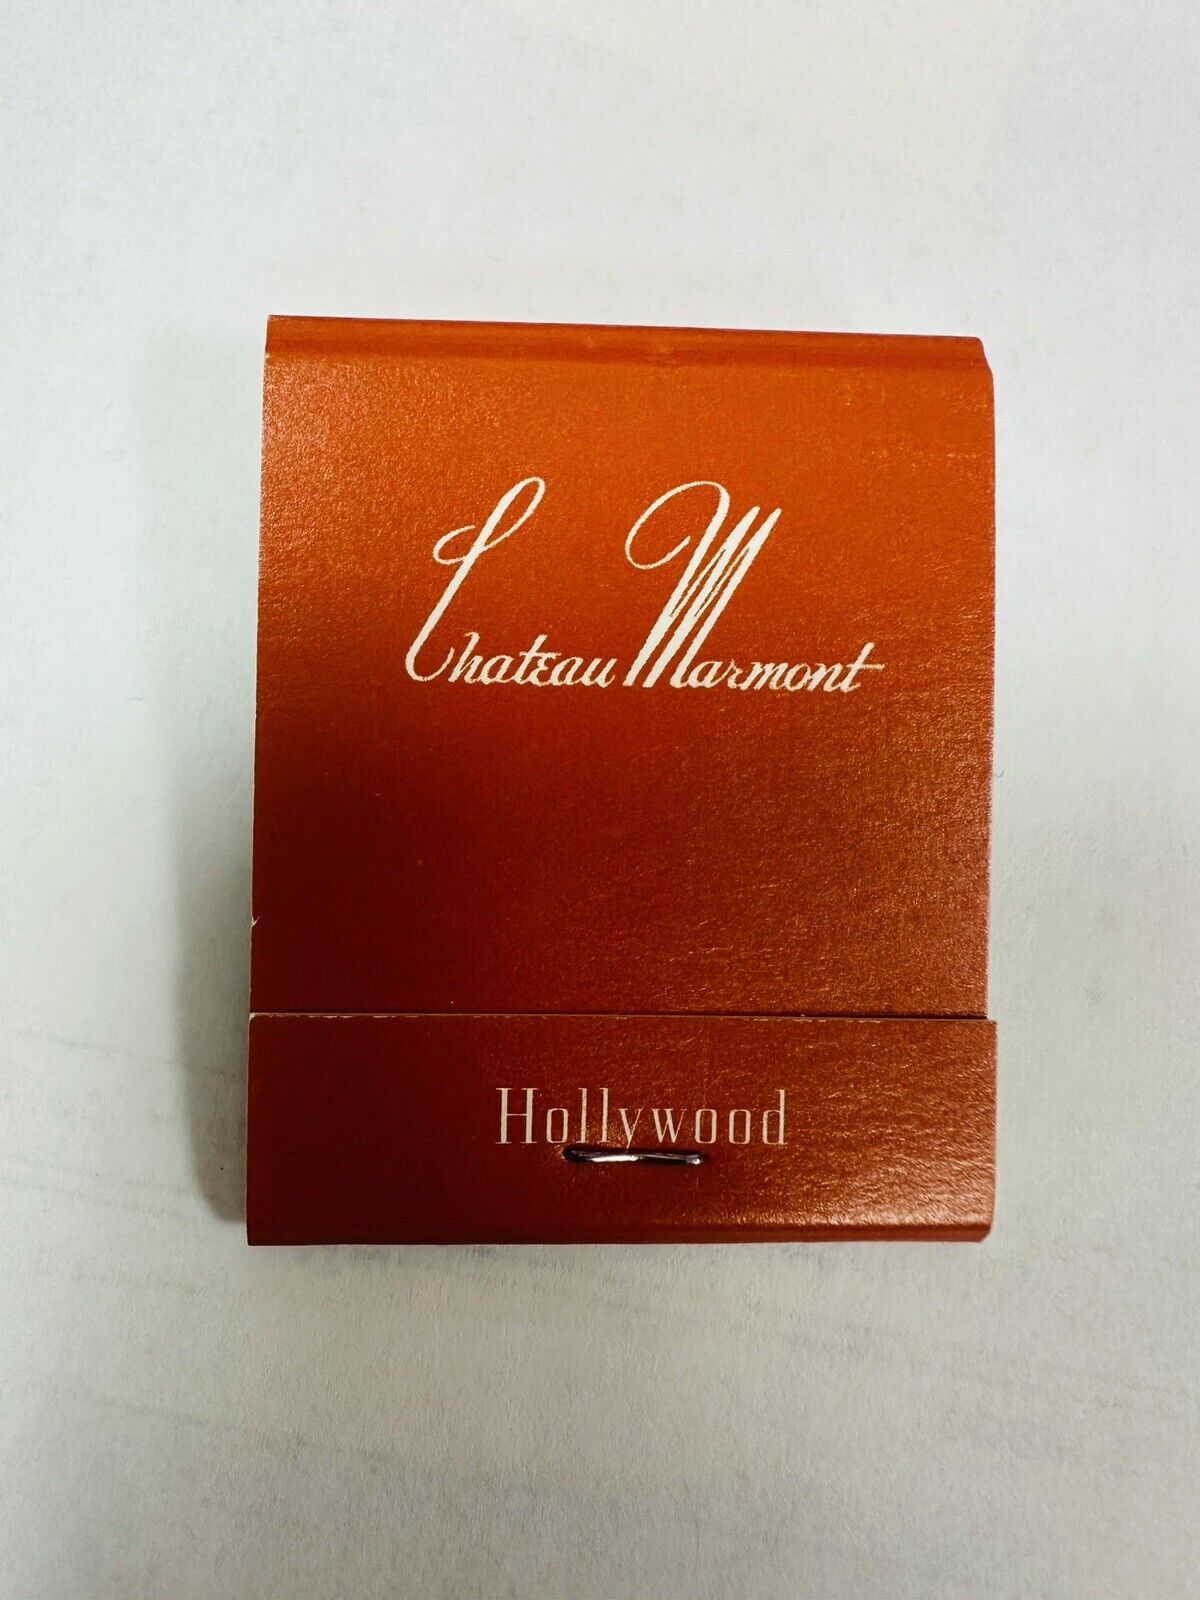 100% AUTHENTIC Chateau Marmont Collector Matches. NEW.